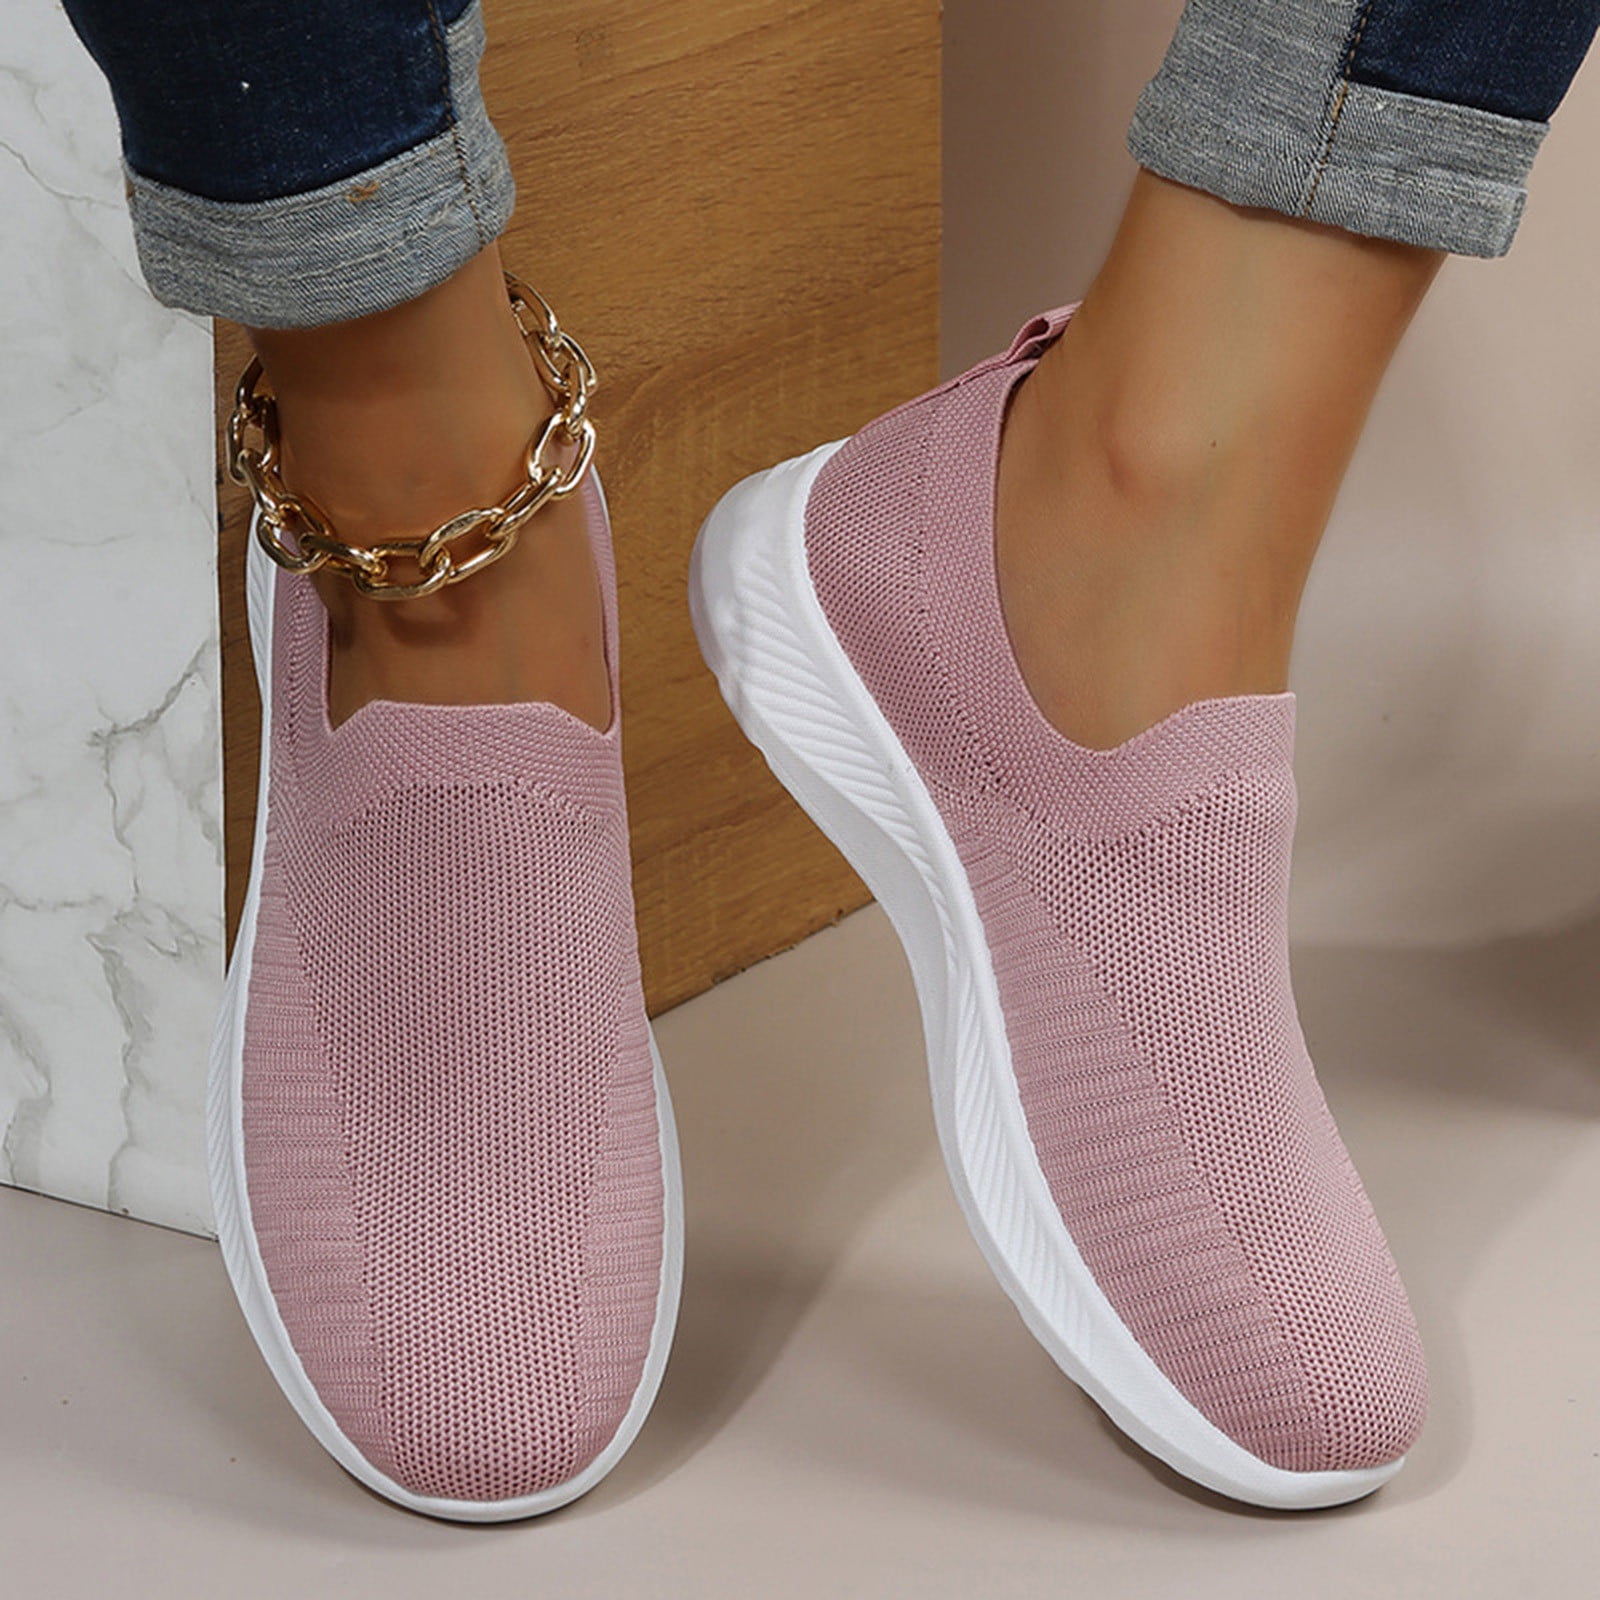 22GG Women Sneakers New Luxury GGity Lette Colors Light Flat Shoes Ladies  Outdoor Men Running Shoes Large Size 43 From Lanp777, $30.36 | DHgate.Com